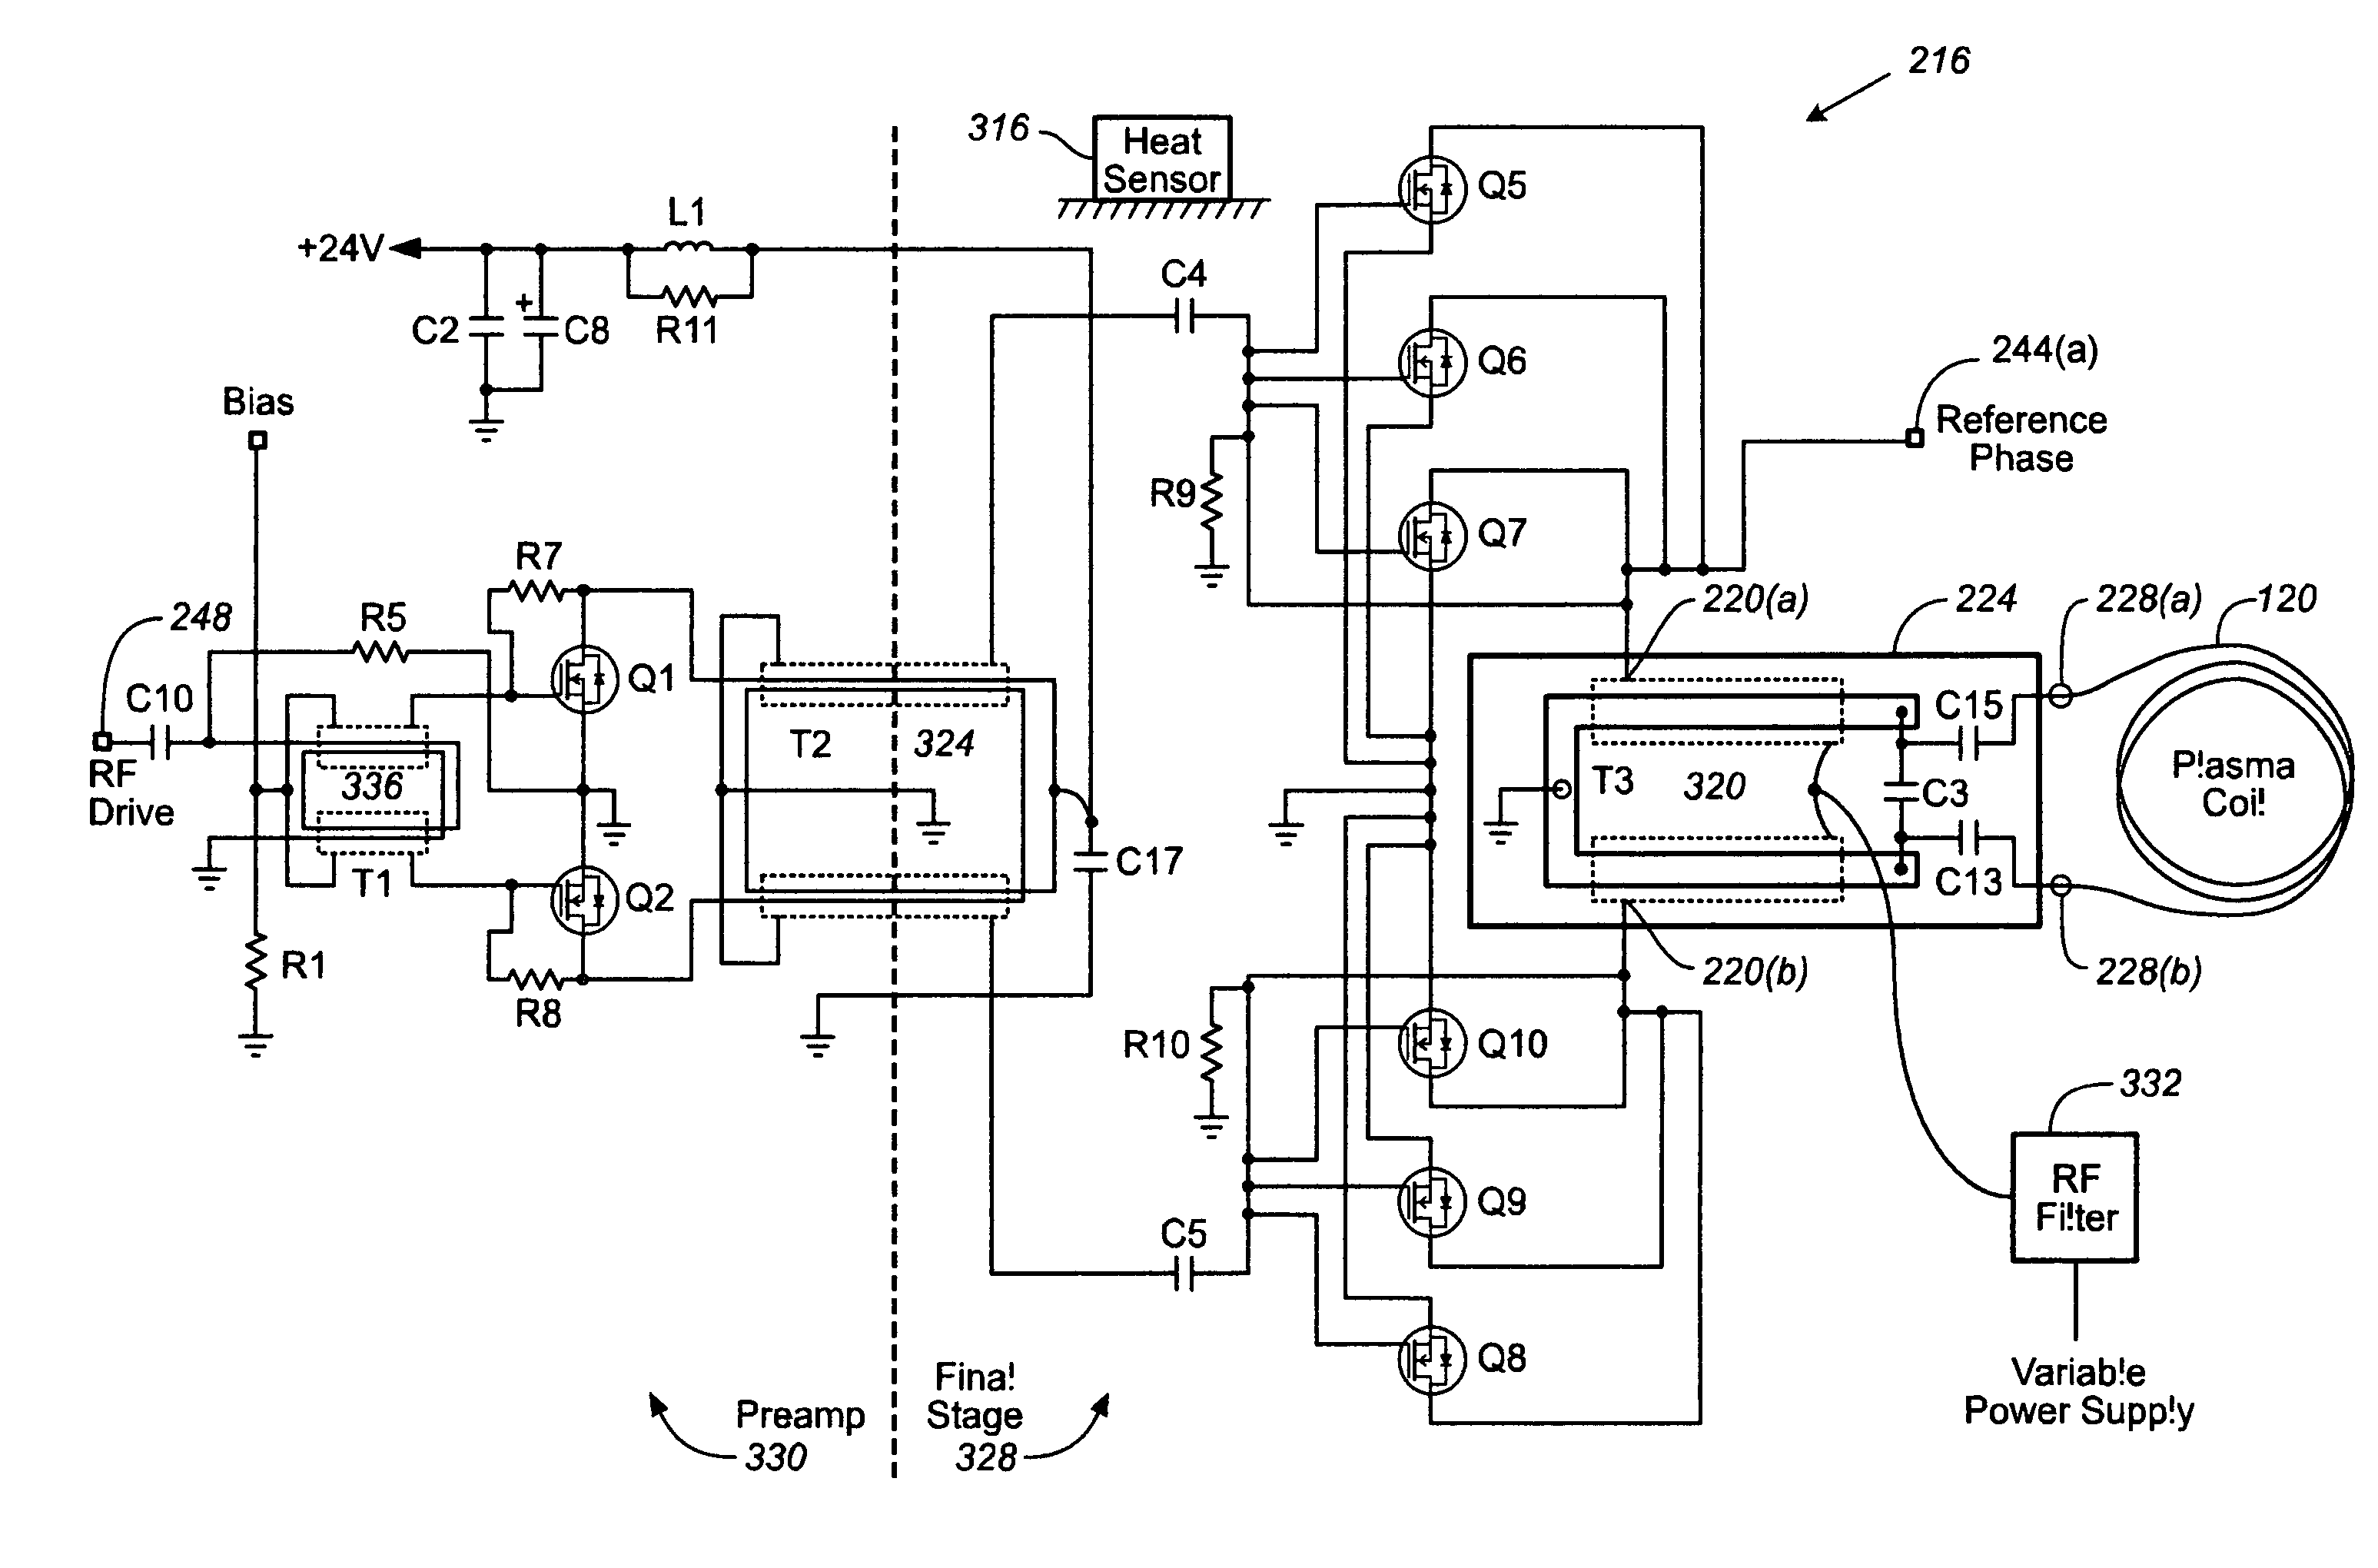 Inductively-coupled RF power source